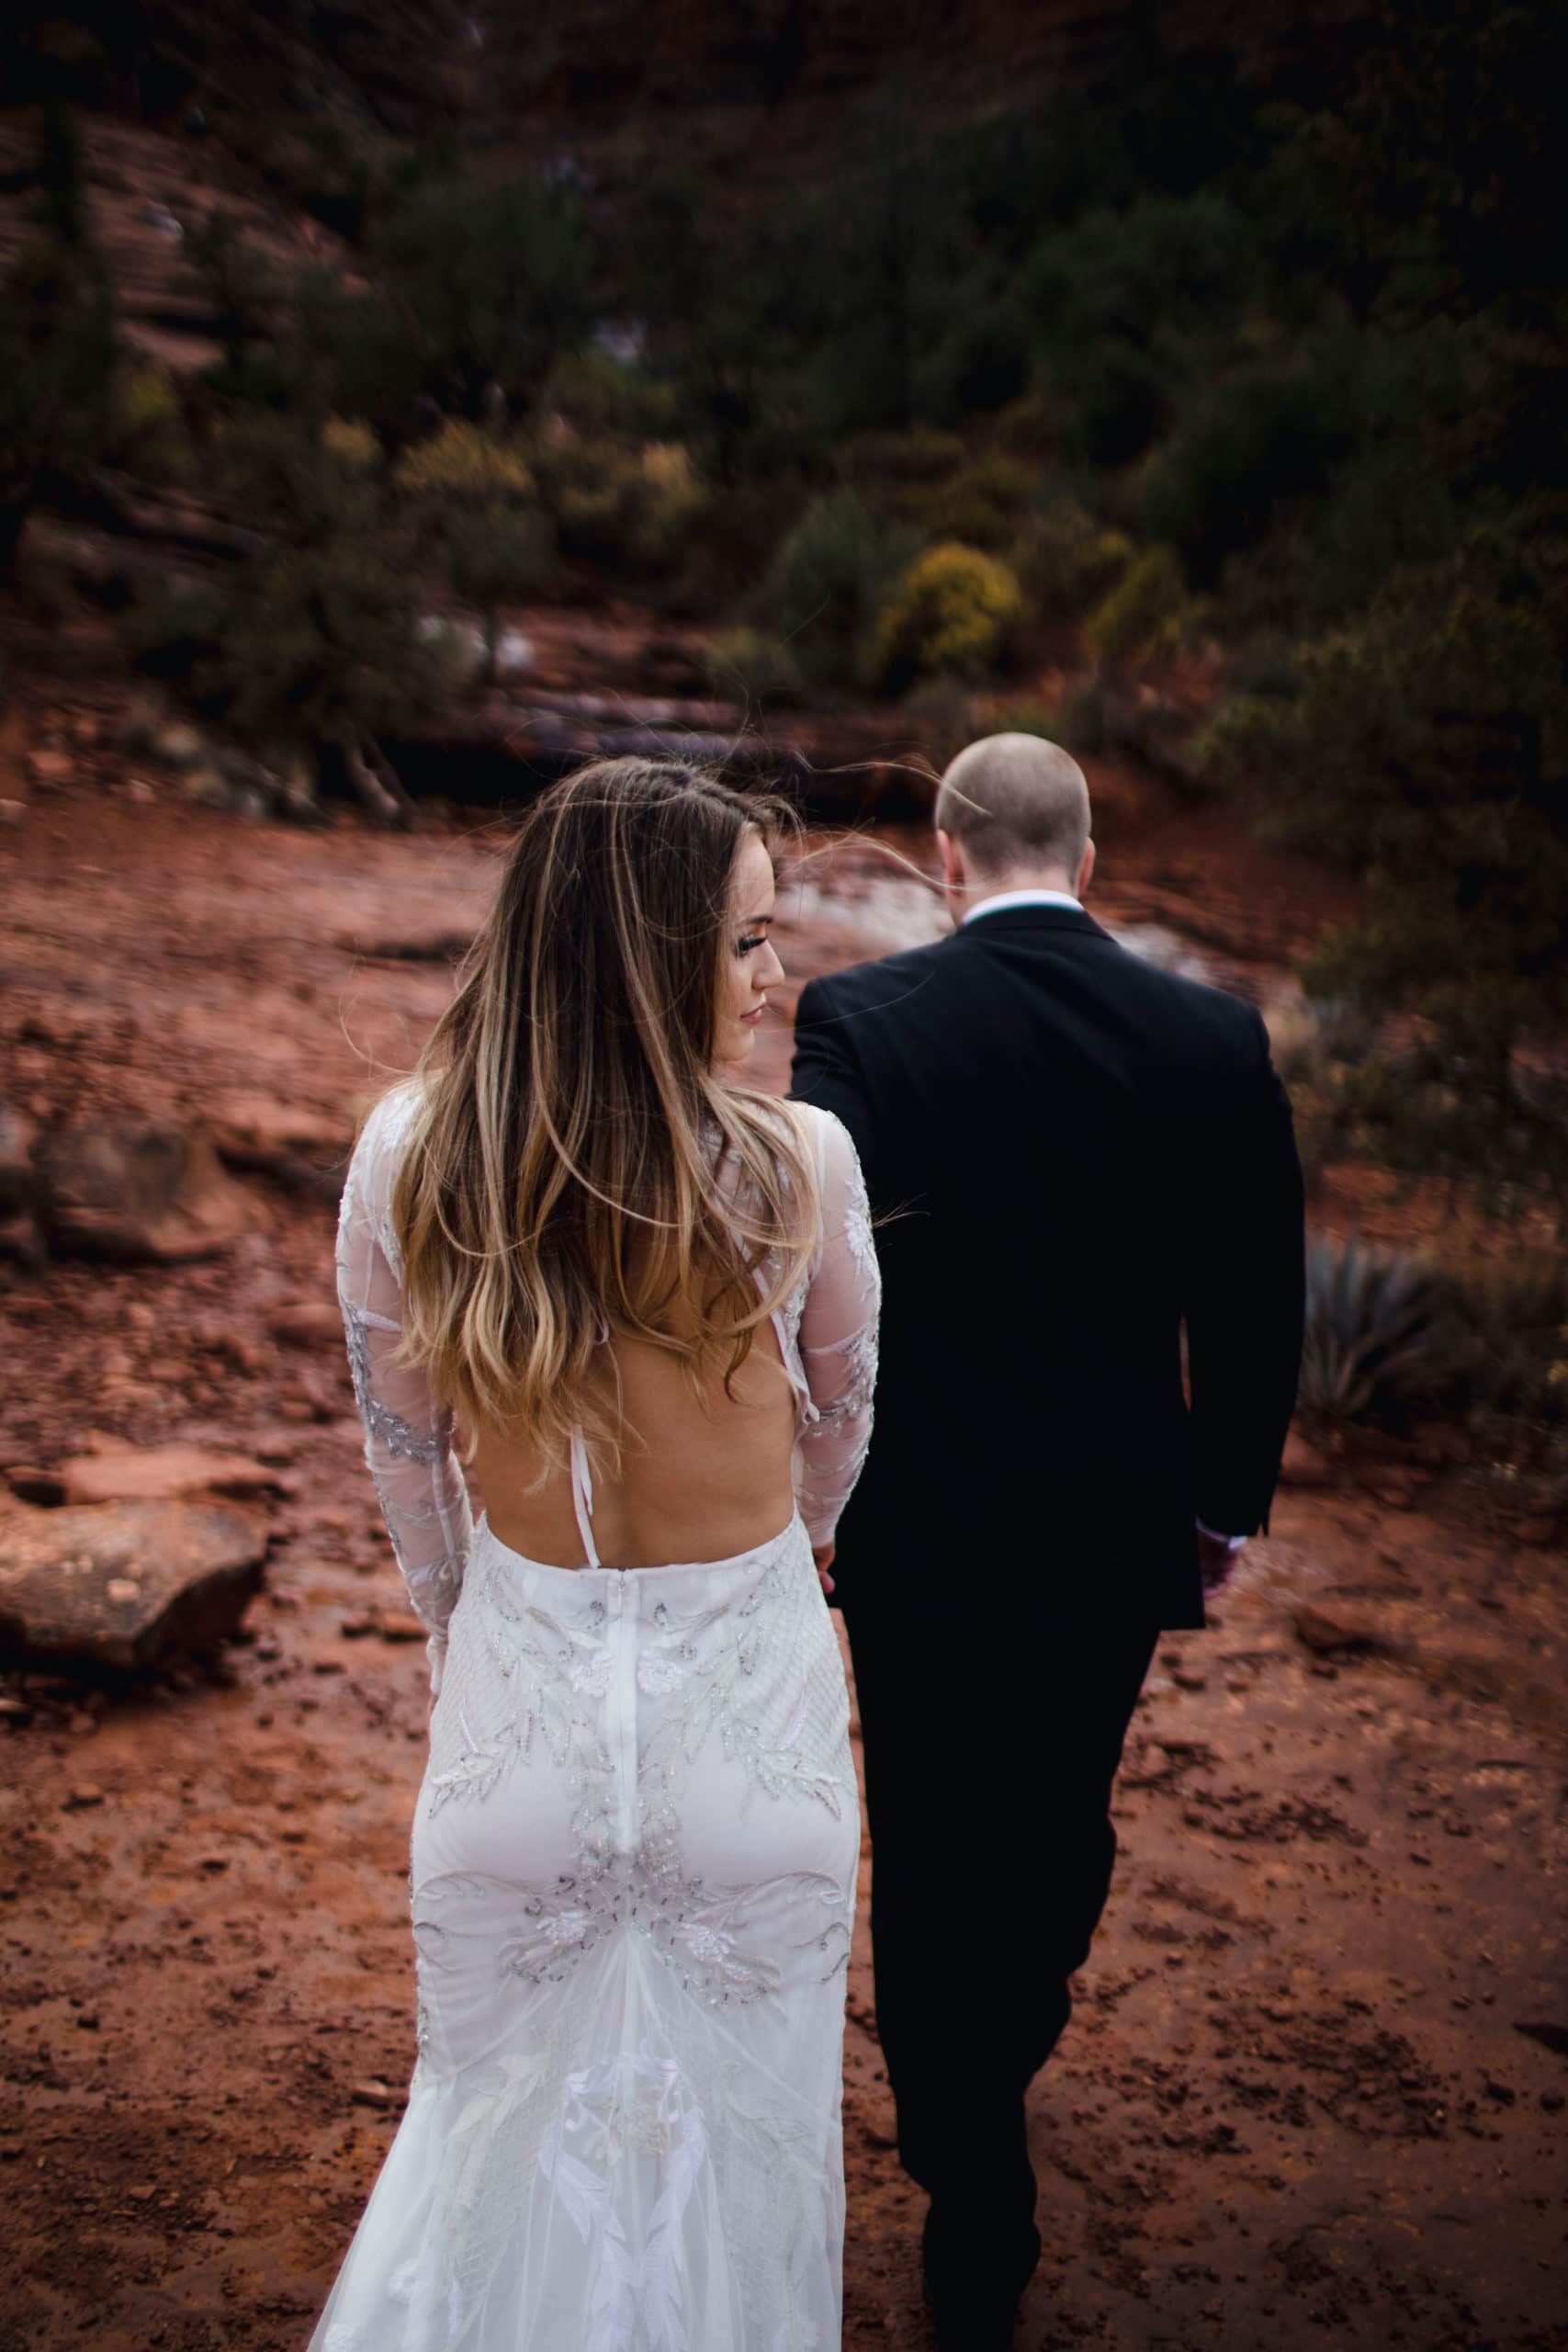 A couple that eloped in Sedona among the red rocks.